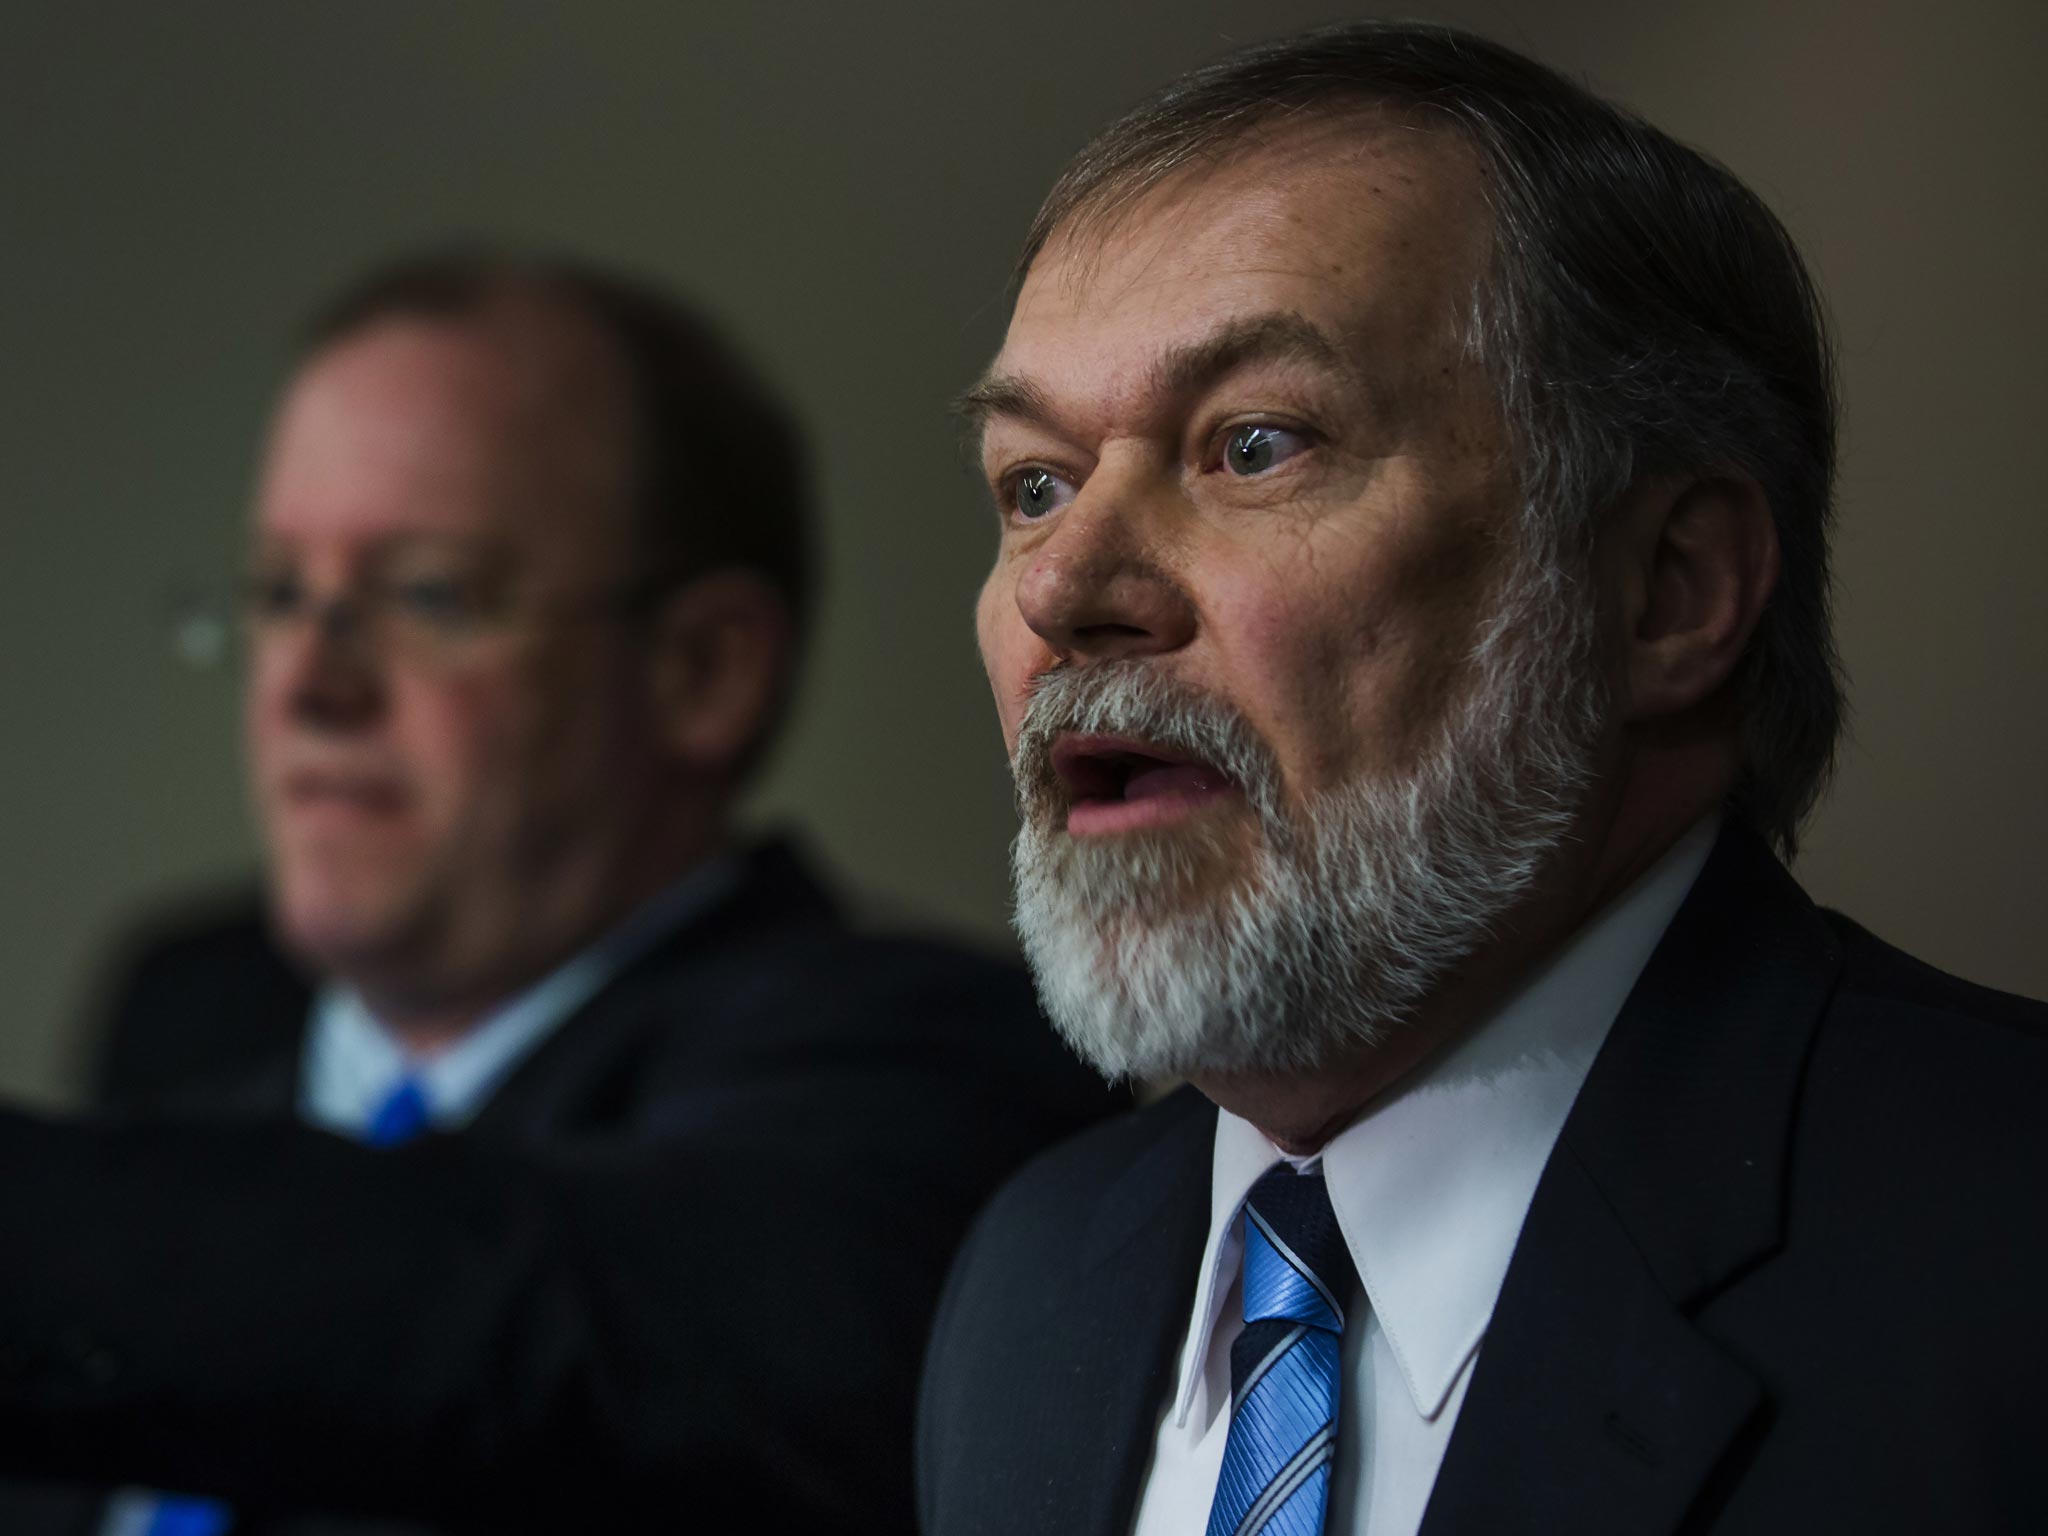 Scott Lively, president of the anti-LGBT rights group Defend the Family